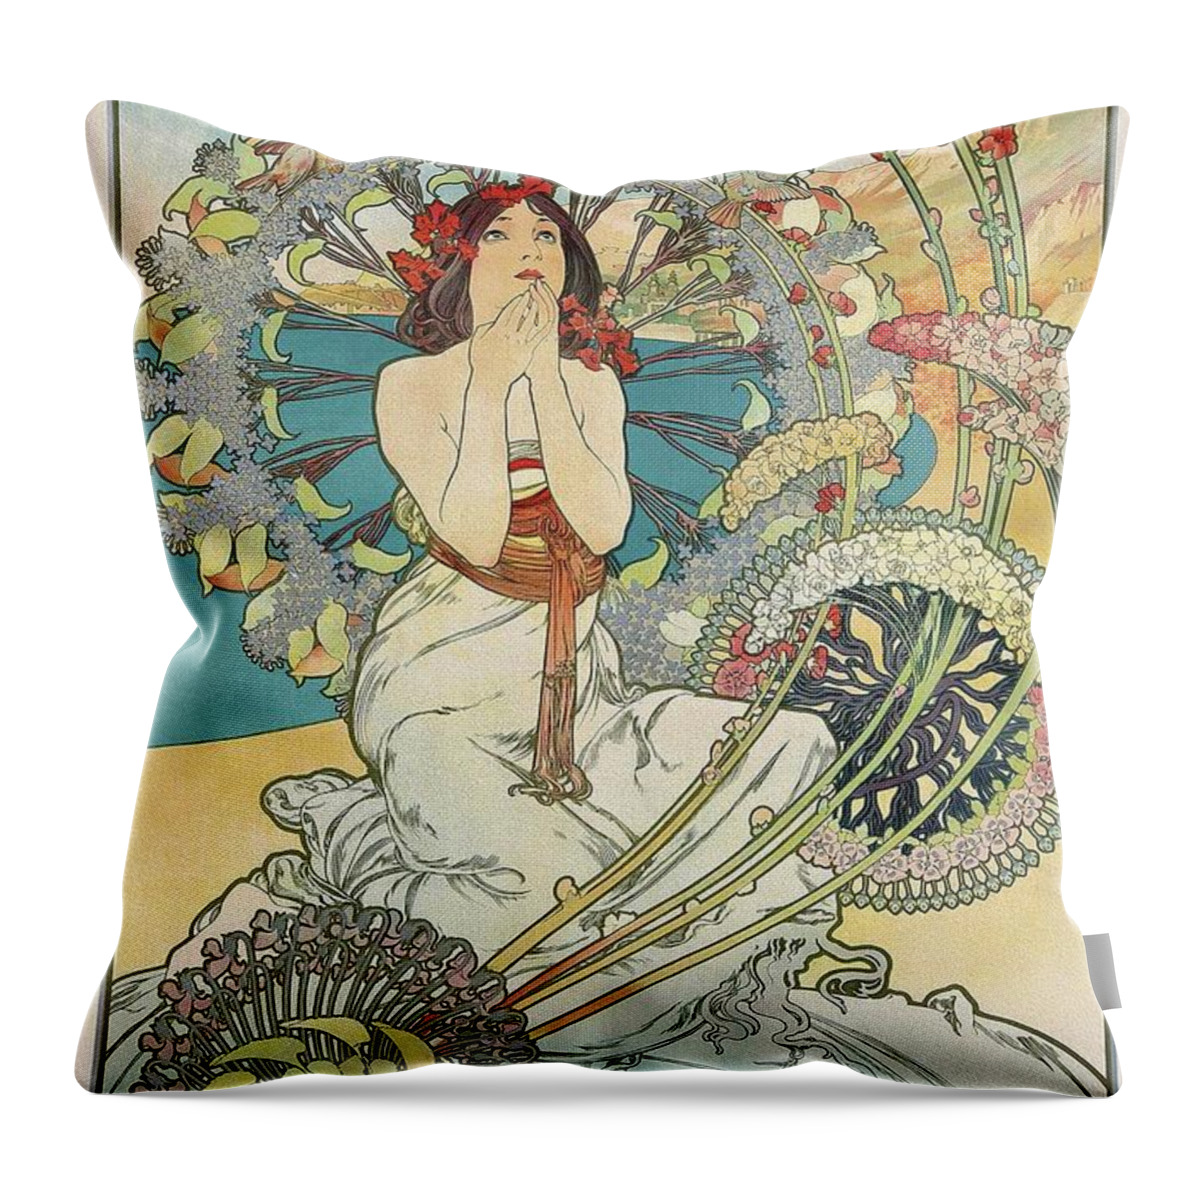 Posters For Sale Throw Pillow featuring the painting Monaco Monte Carlo 1897 Mucha Art Nouveau Poster by Vincent Monozlay